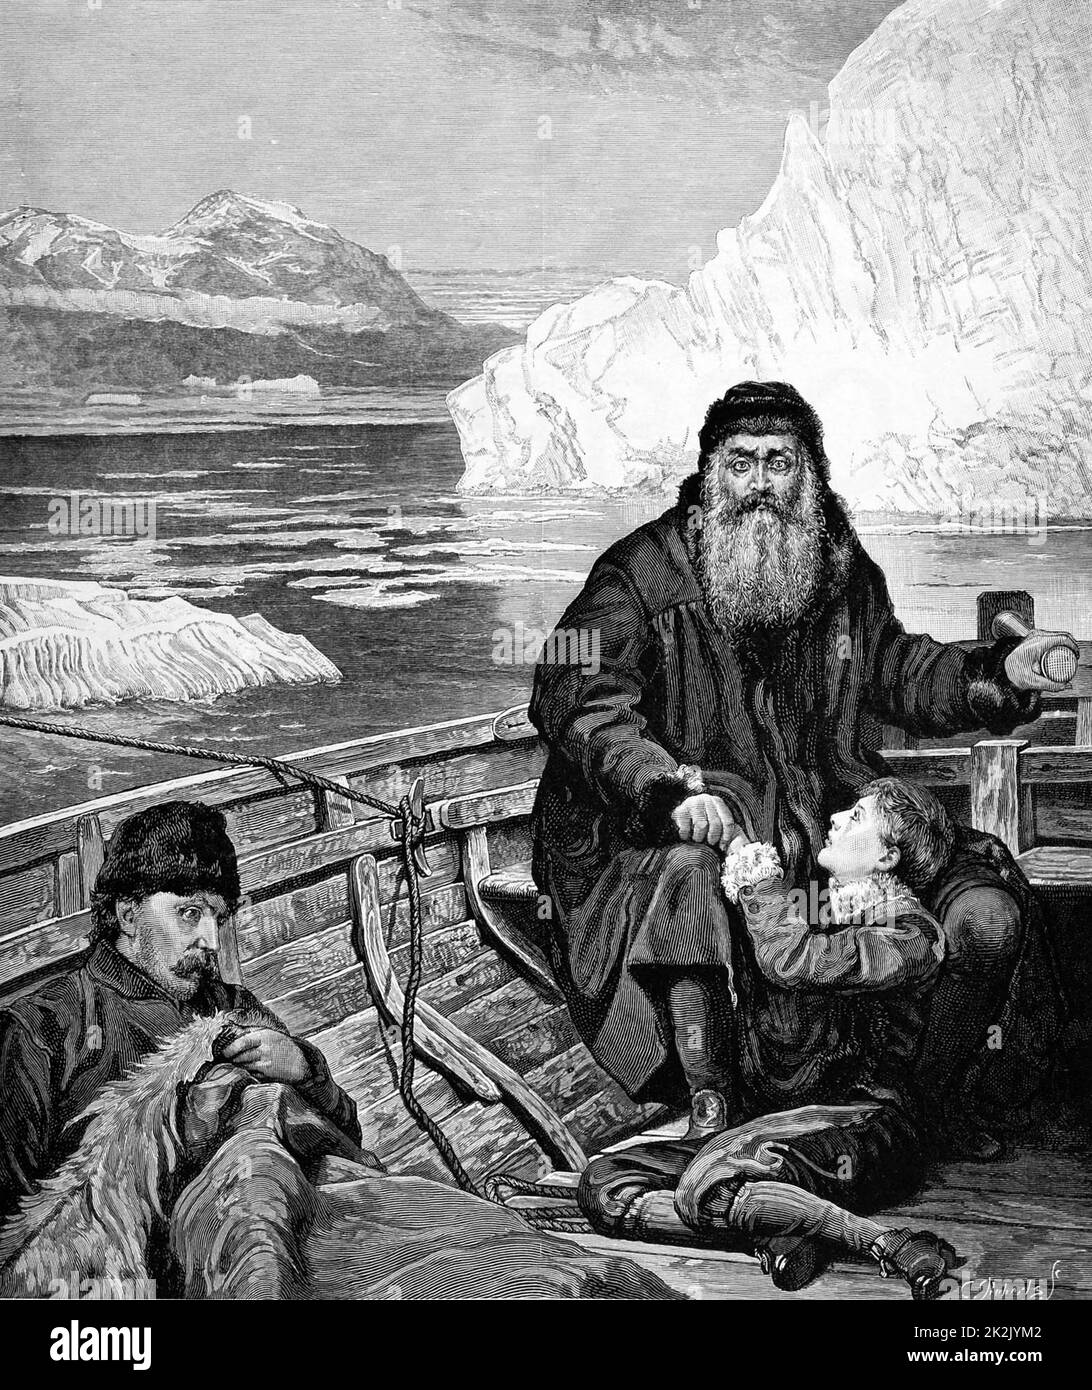 The Last Voyage of Henry Hudson. Henry Hudson (c. 1560 – 1611?) English sea explorer and navigator in the early 17th century. After several voyages on behalf of English merchants to explore a prospective Northeast Passage to India, Hudson explored the region around modern New York City while looking for a western route to Asia under the auspices of the Dutch East India Company. Stock Photo